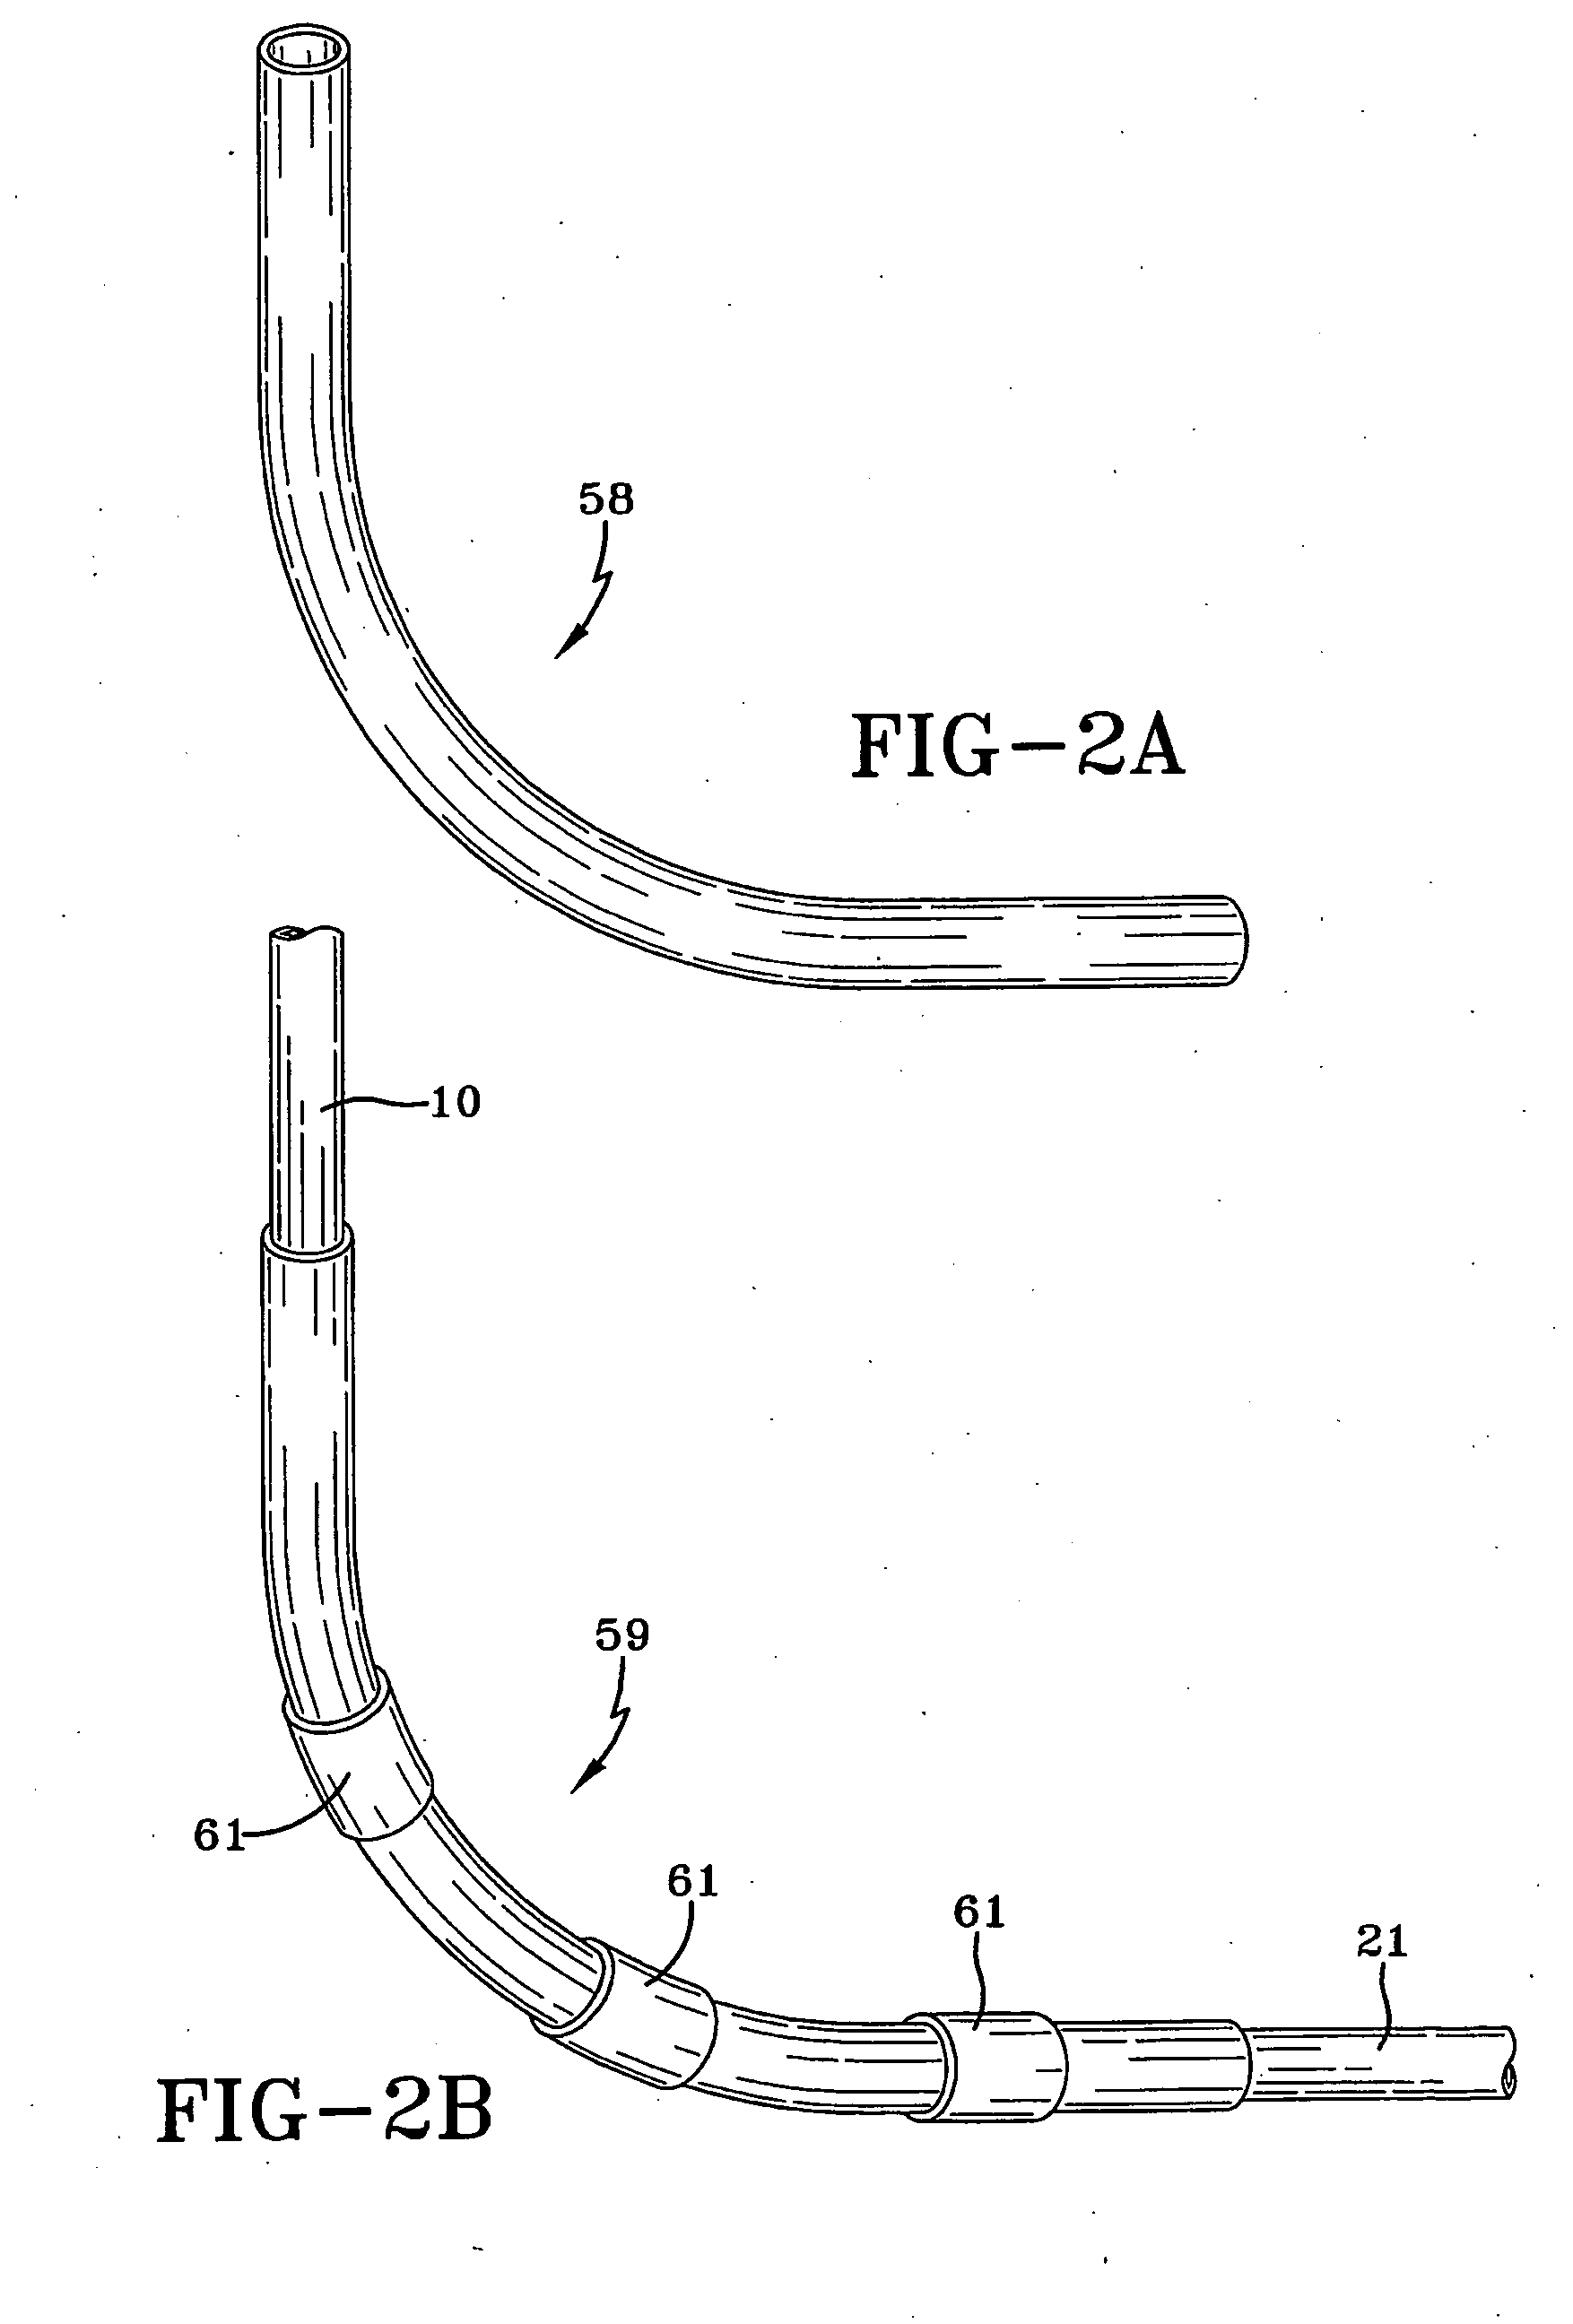 Pop-up SportsTraining Assemblies & Related Devices and Methods